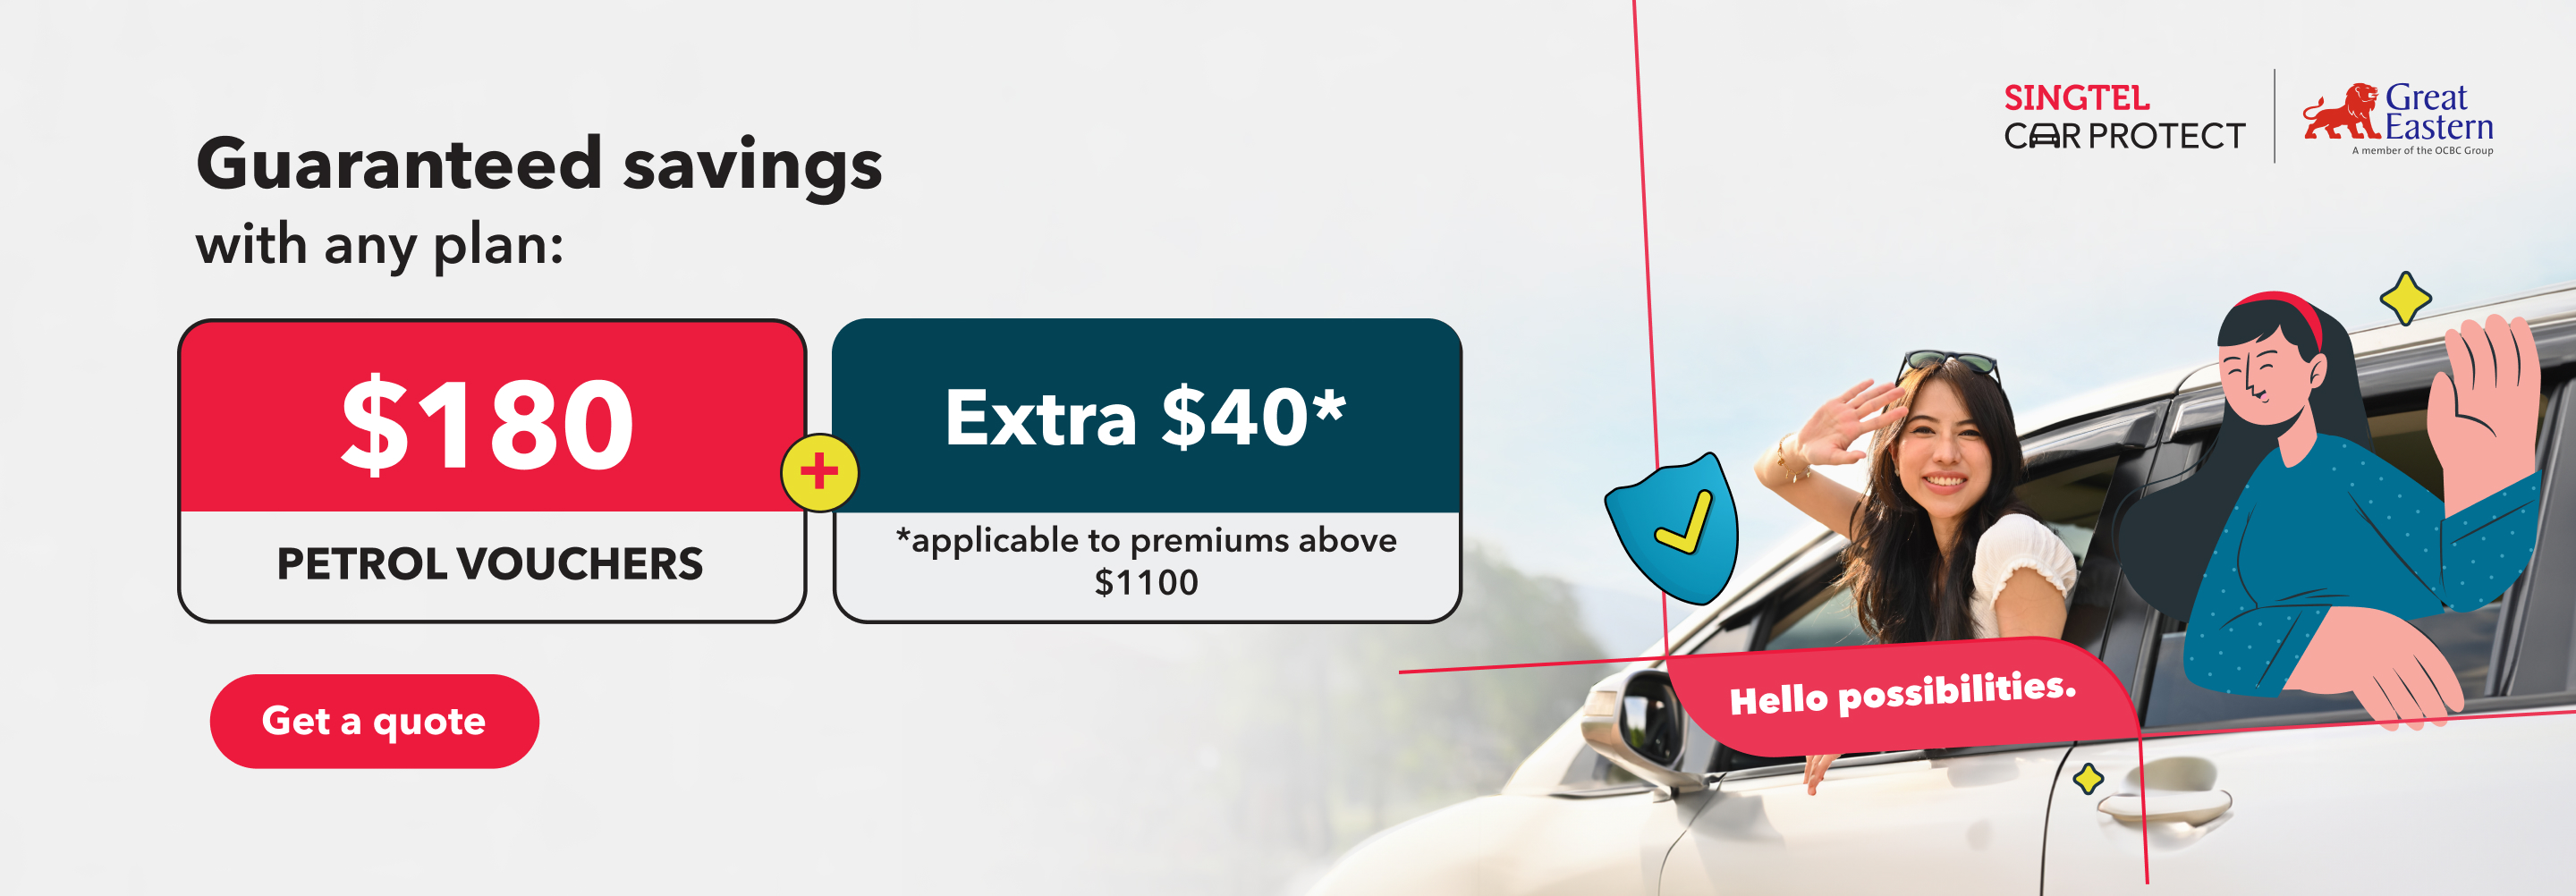 Singtel Car Protect - Guanrateed $180 + extra $40 petrol vouchers